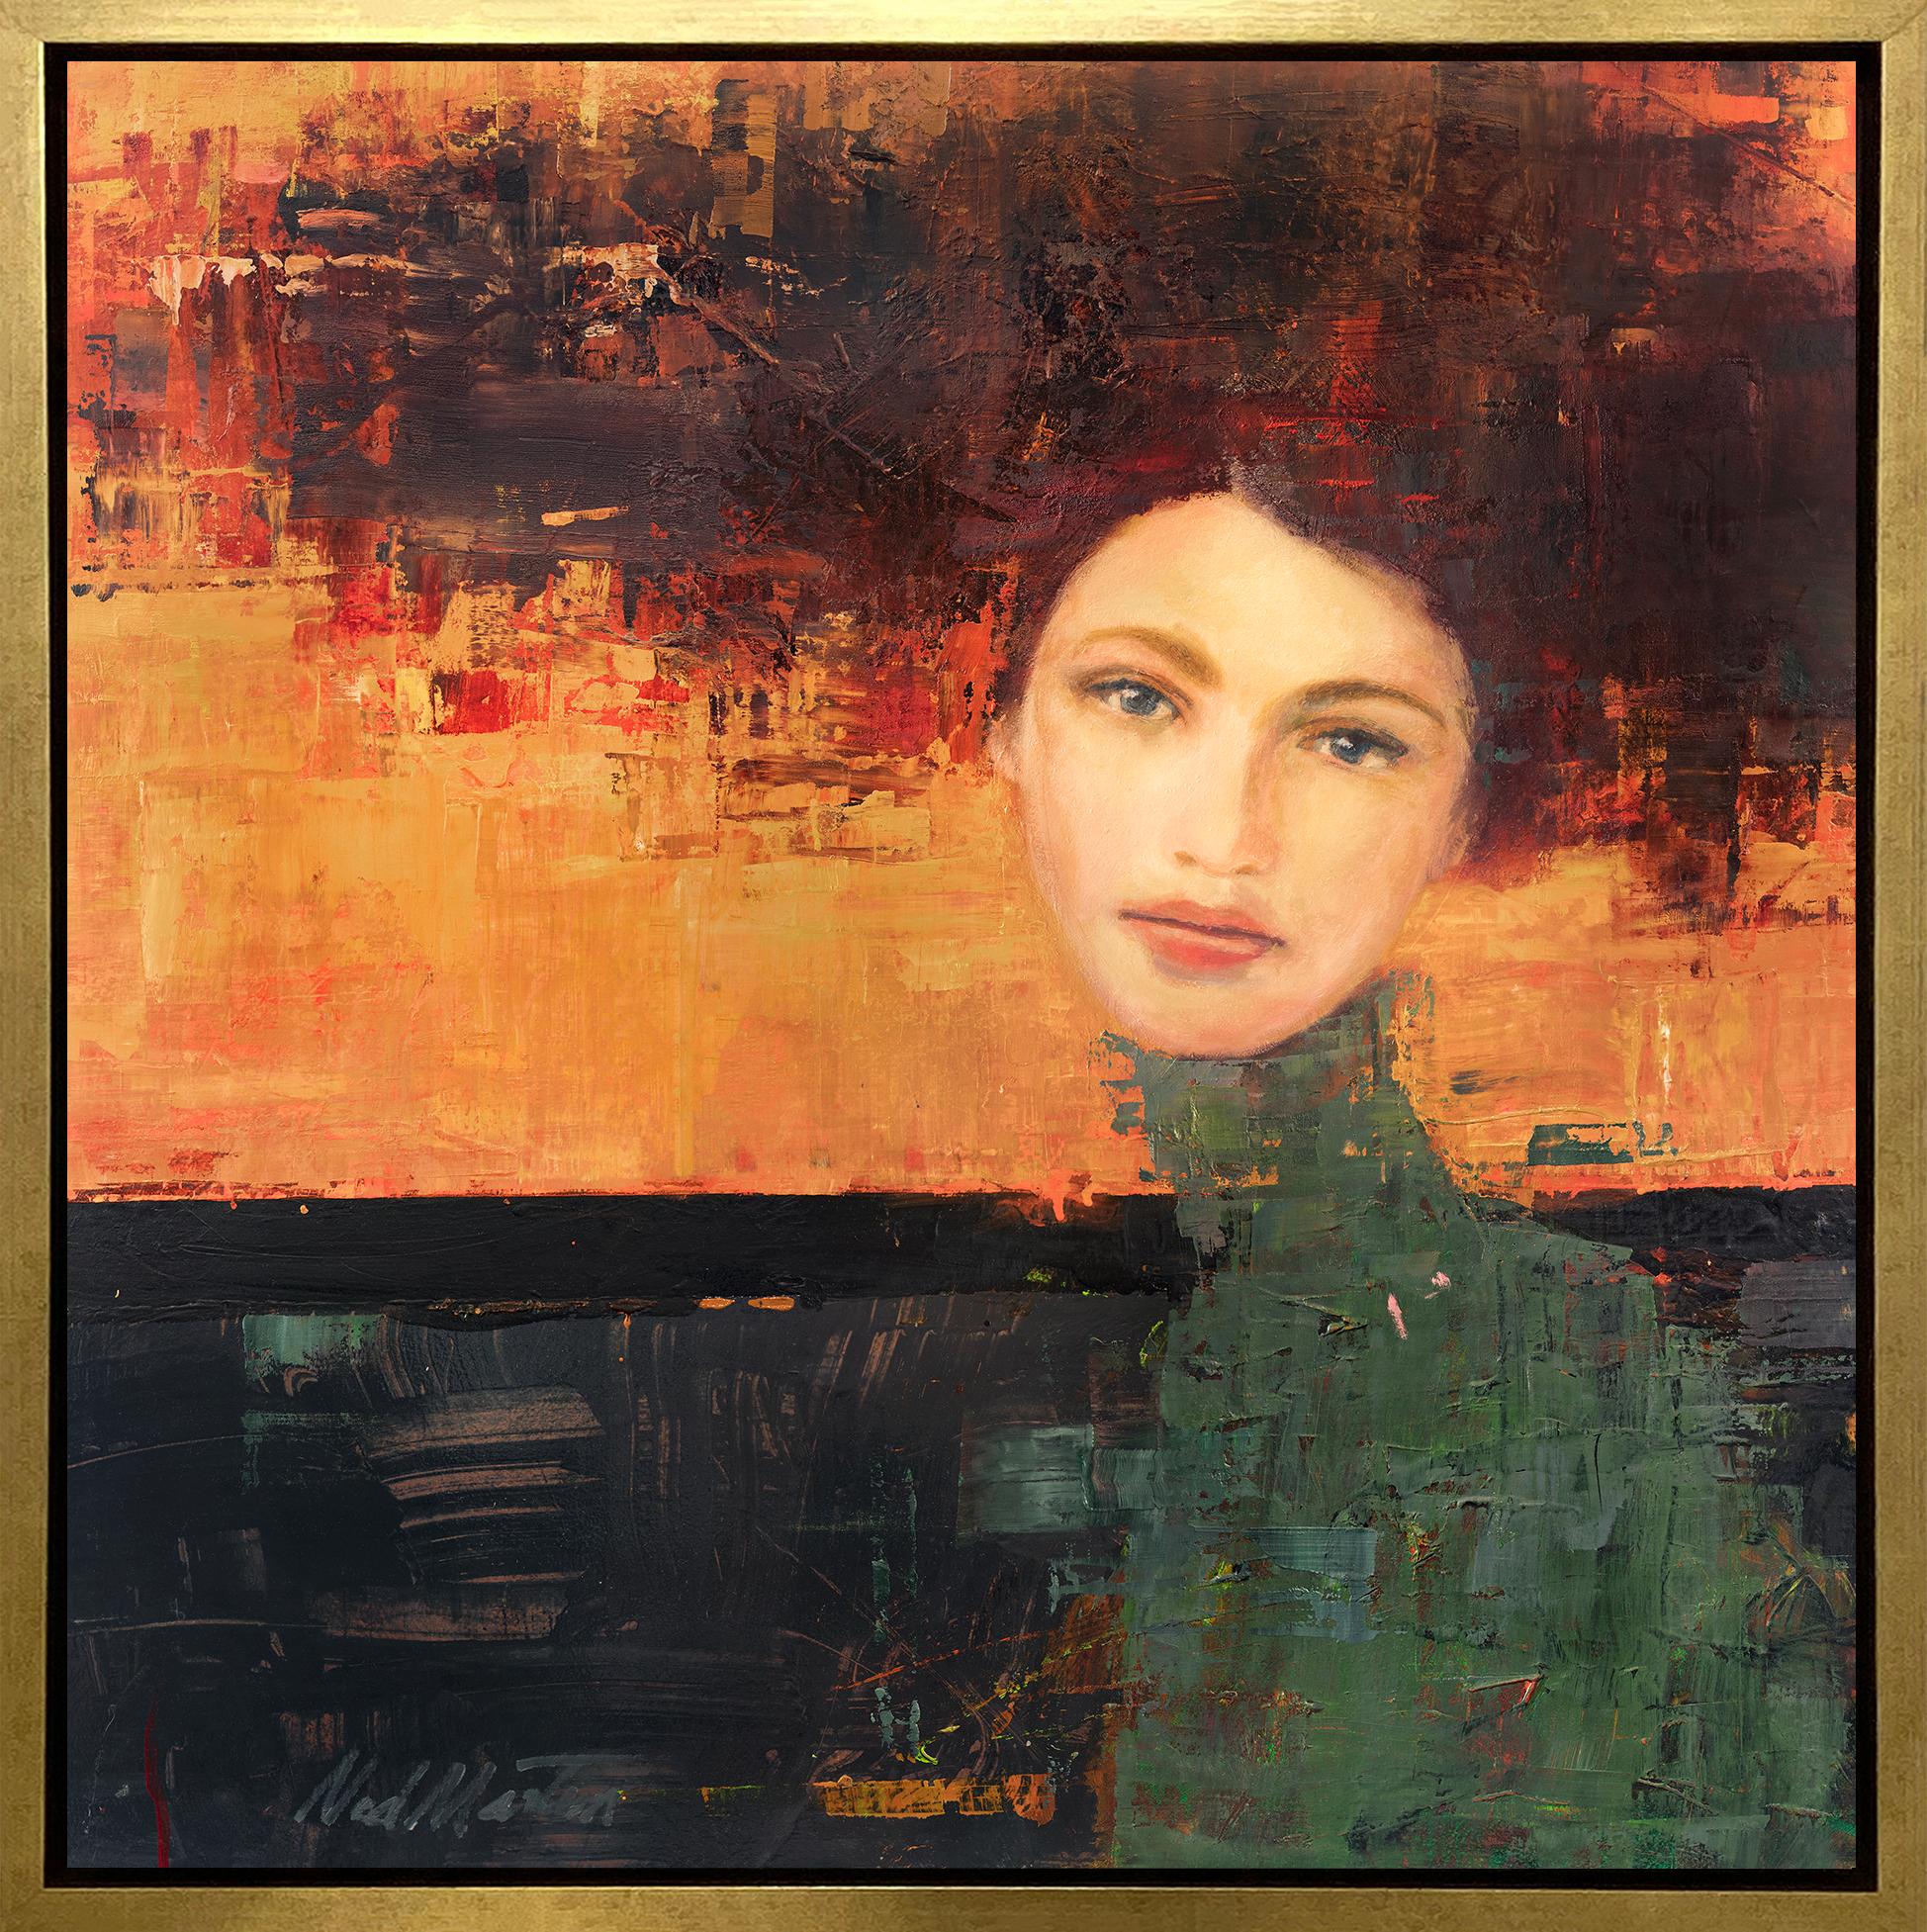 Ned Martin Portrait Print - "Spirits Through Time XI, " Framed Limited Edition Giclee Print, 40" x 40"